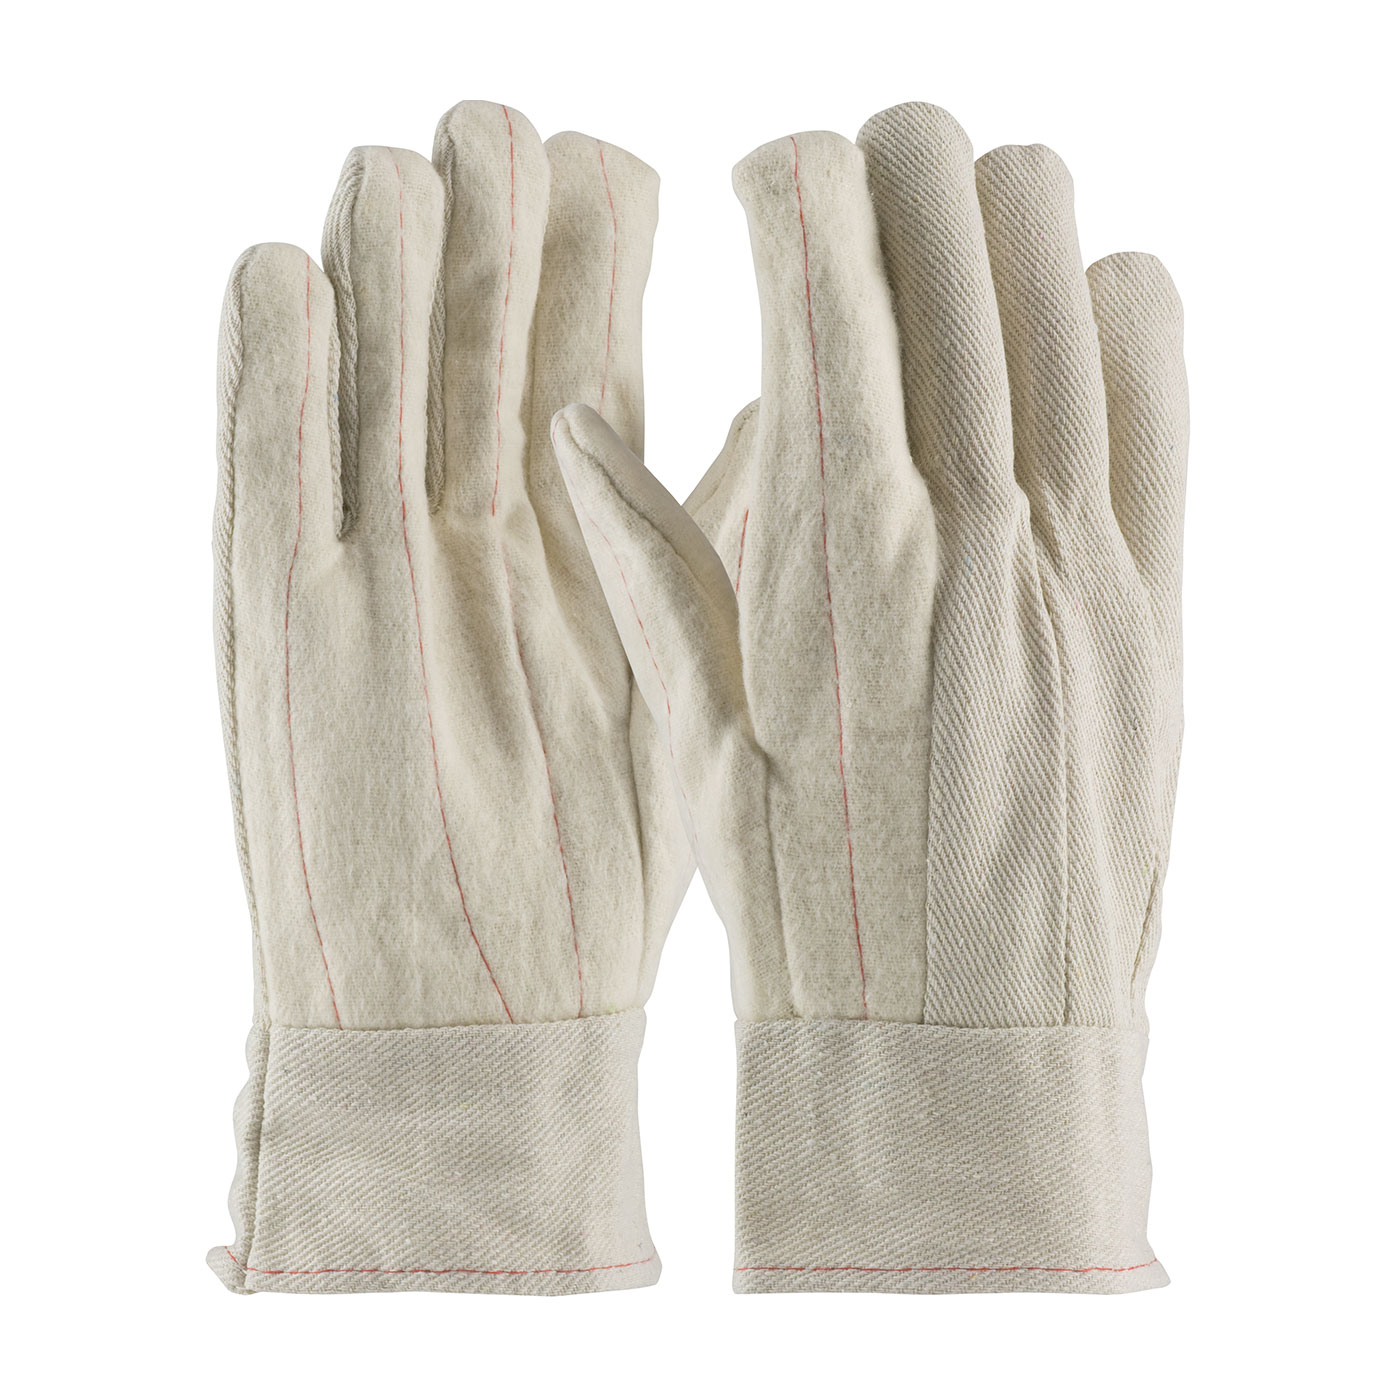 PIP Men's Natural 18oz. Nap-out Finish Double Palm Cotton Canvas Gloves - Band Top